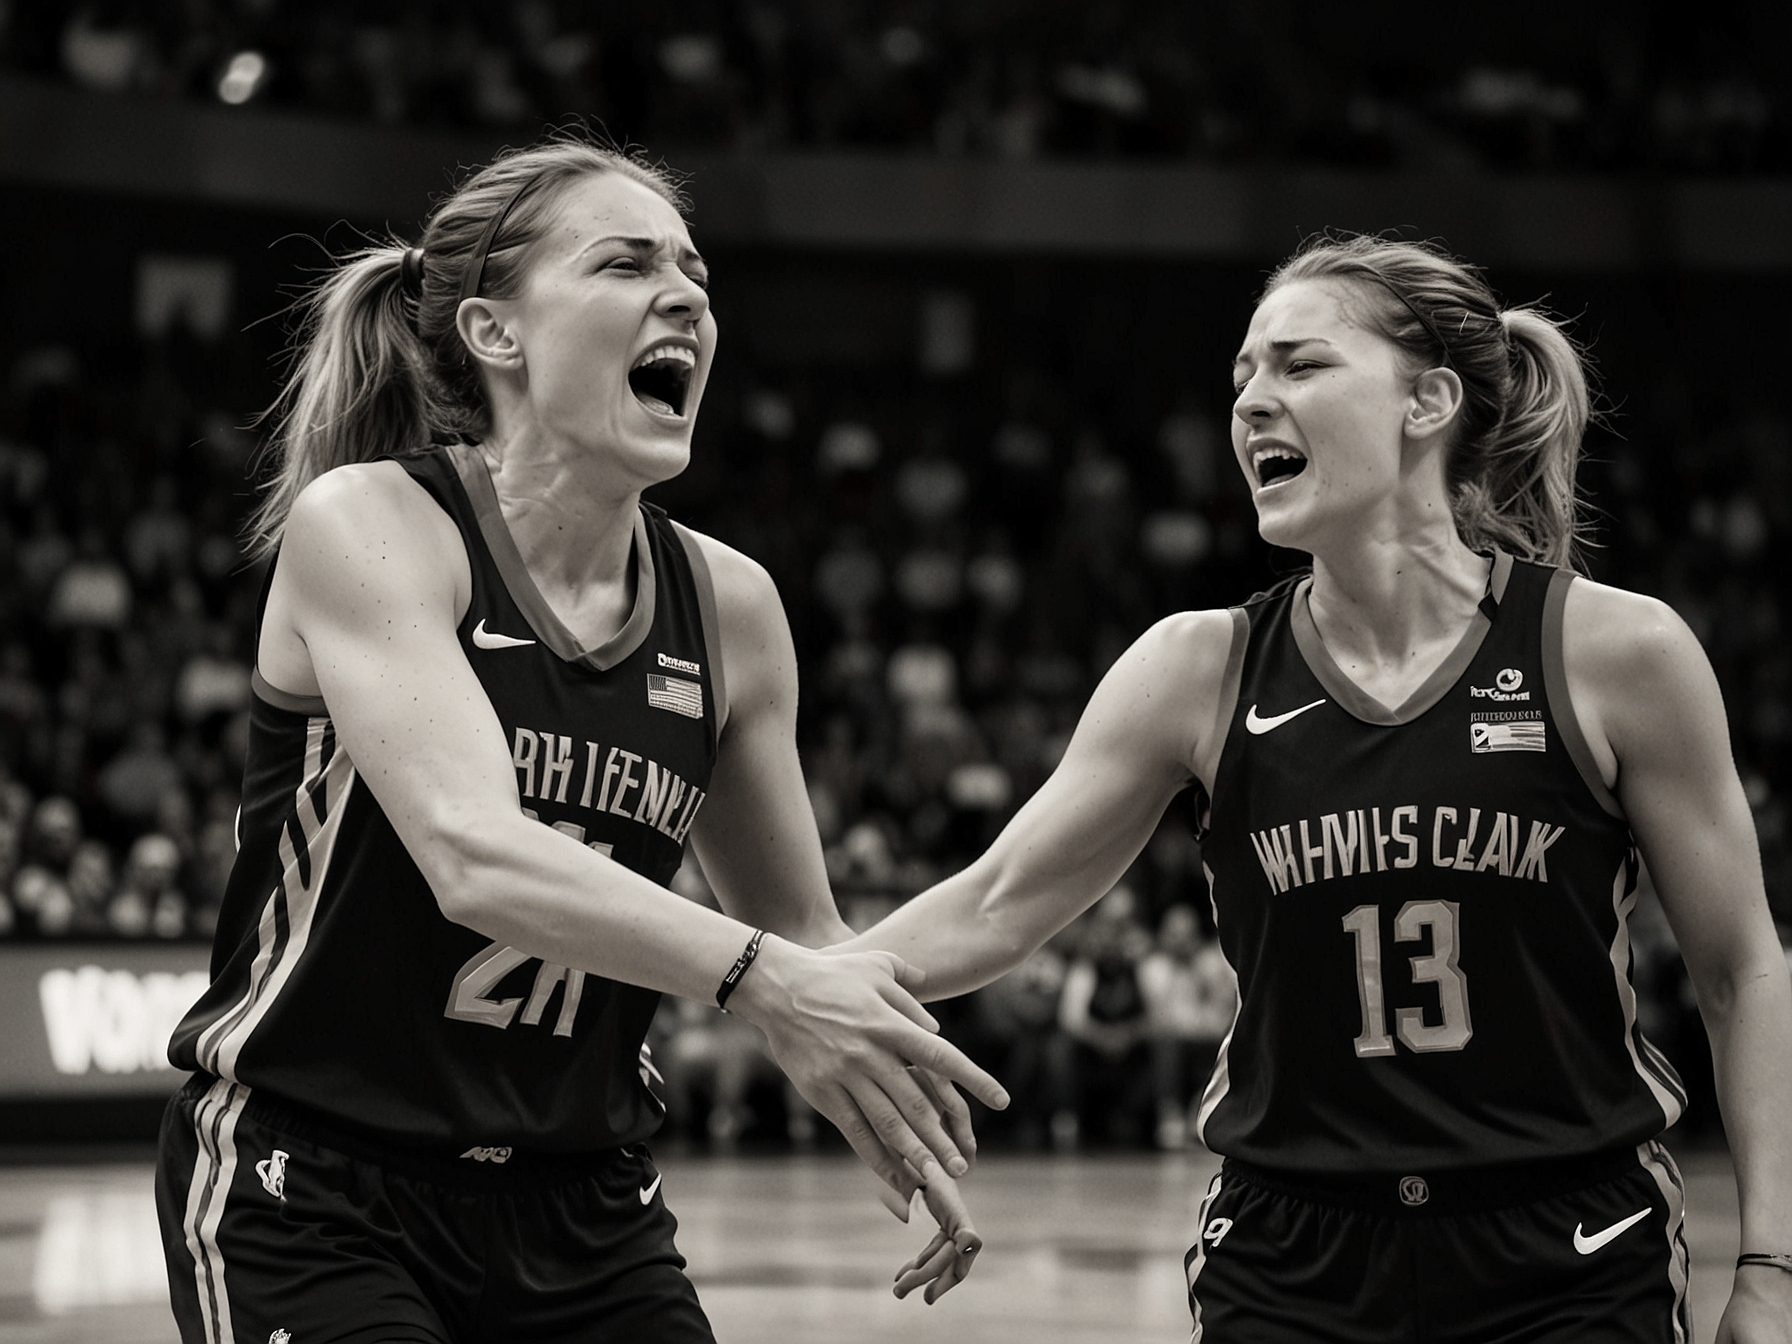 Caitlin Clark visibly in pain, clutching her arm after a brutal foul by a towering WNBA rival during a high-stakes game, highlighting the severe impact of the aggressive play.